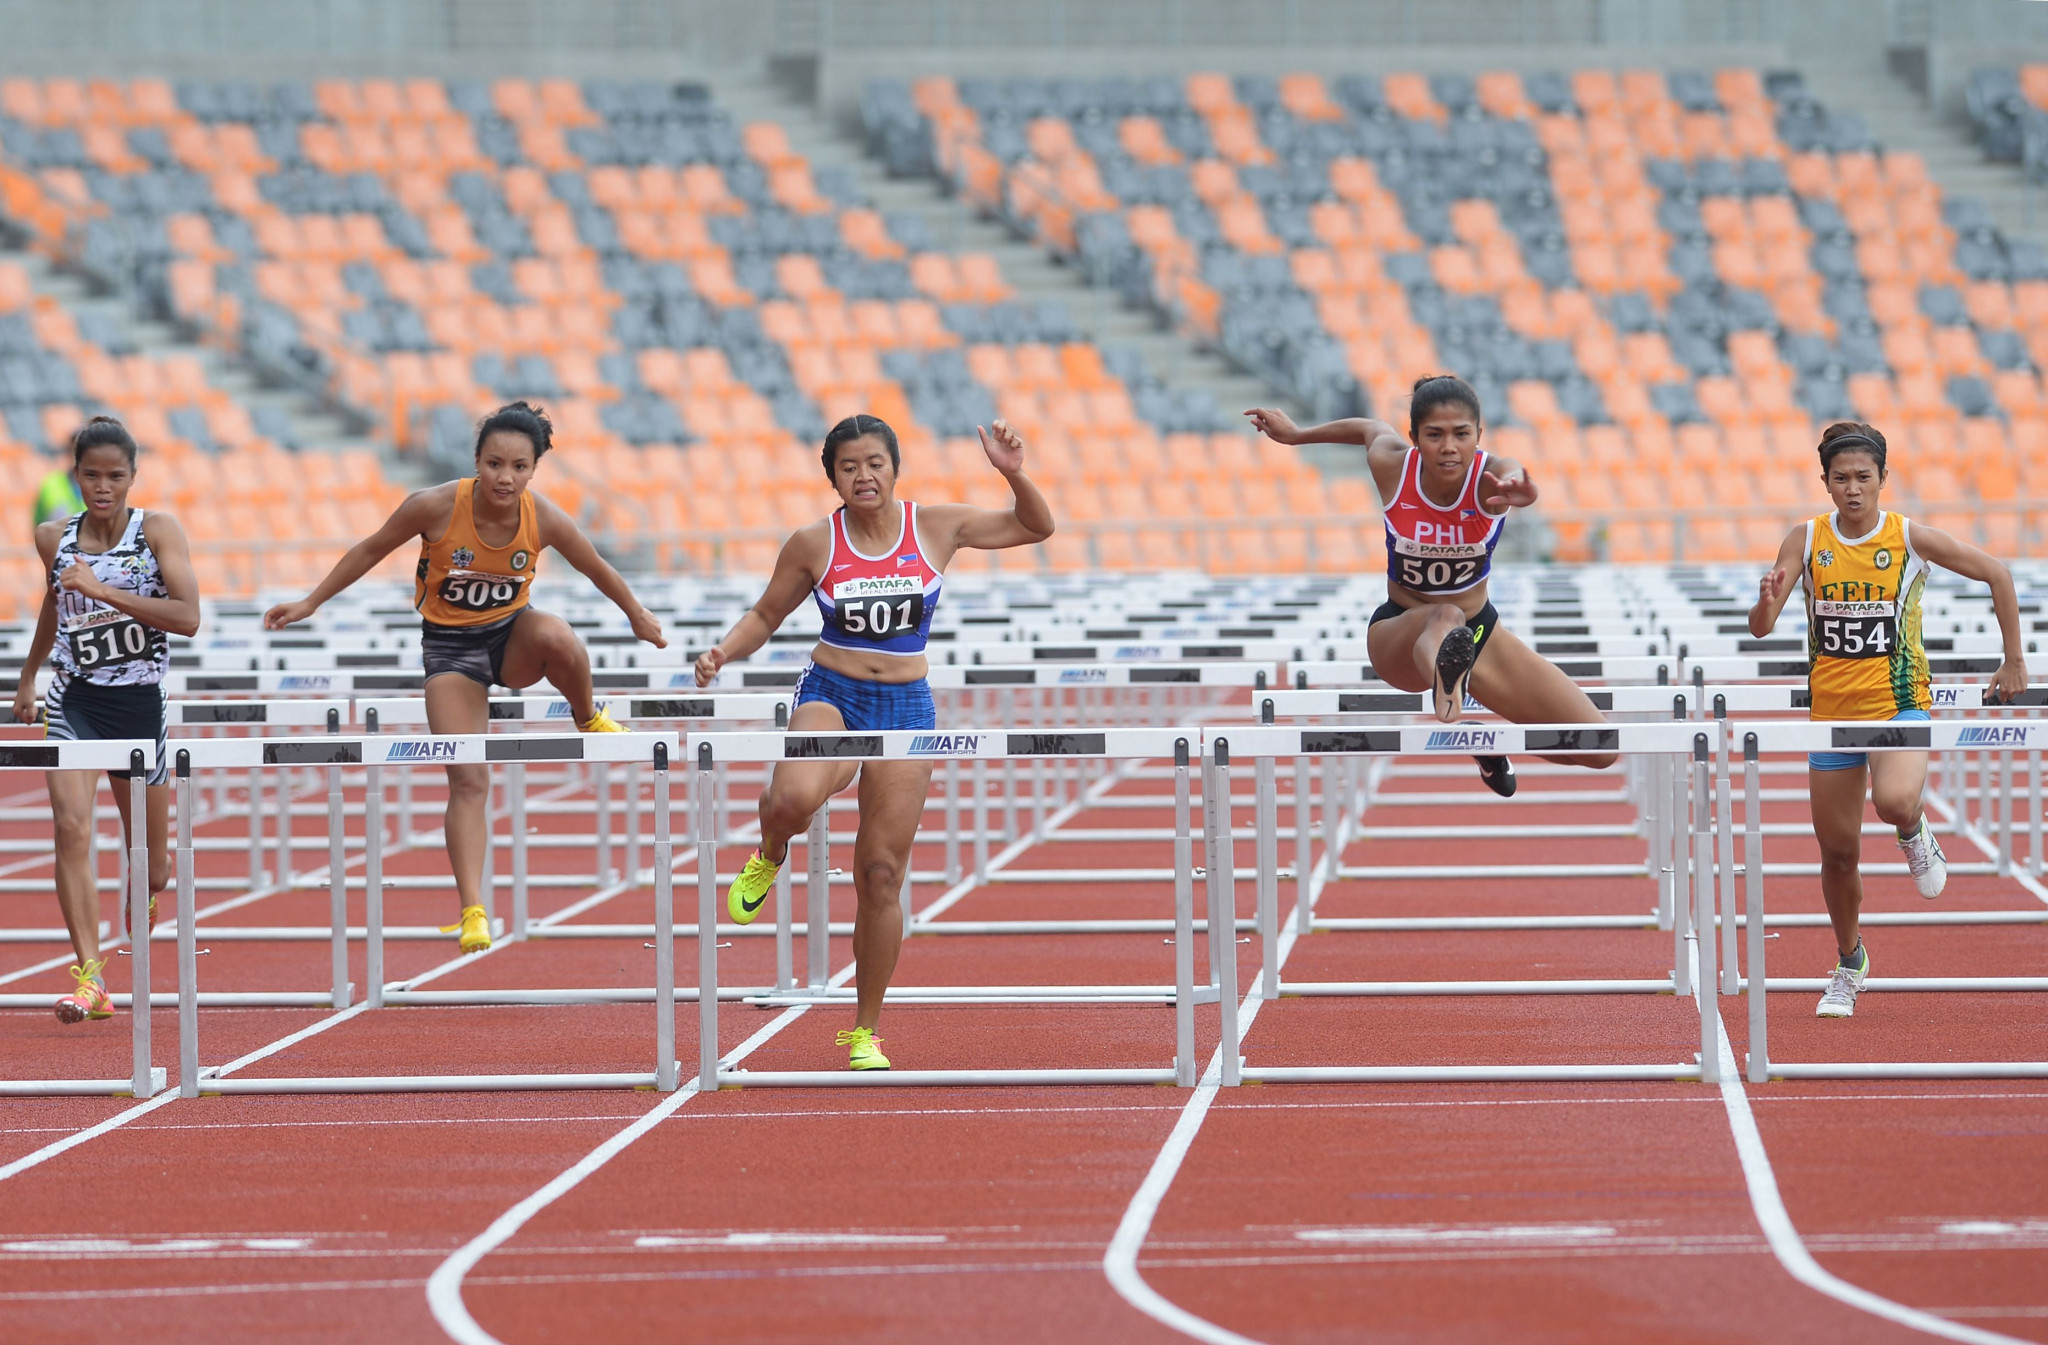 New Clark City in the north of Manila will stage competition as part of the Southeast Asian Games in November ©Getty Images 